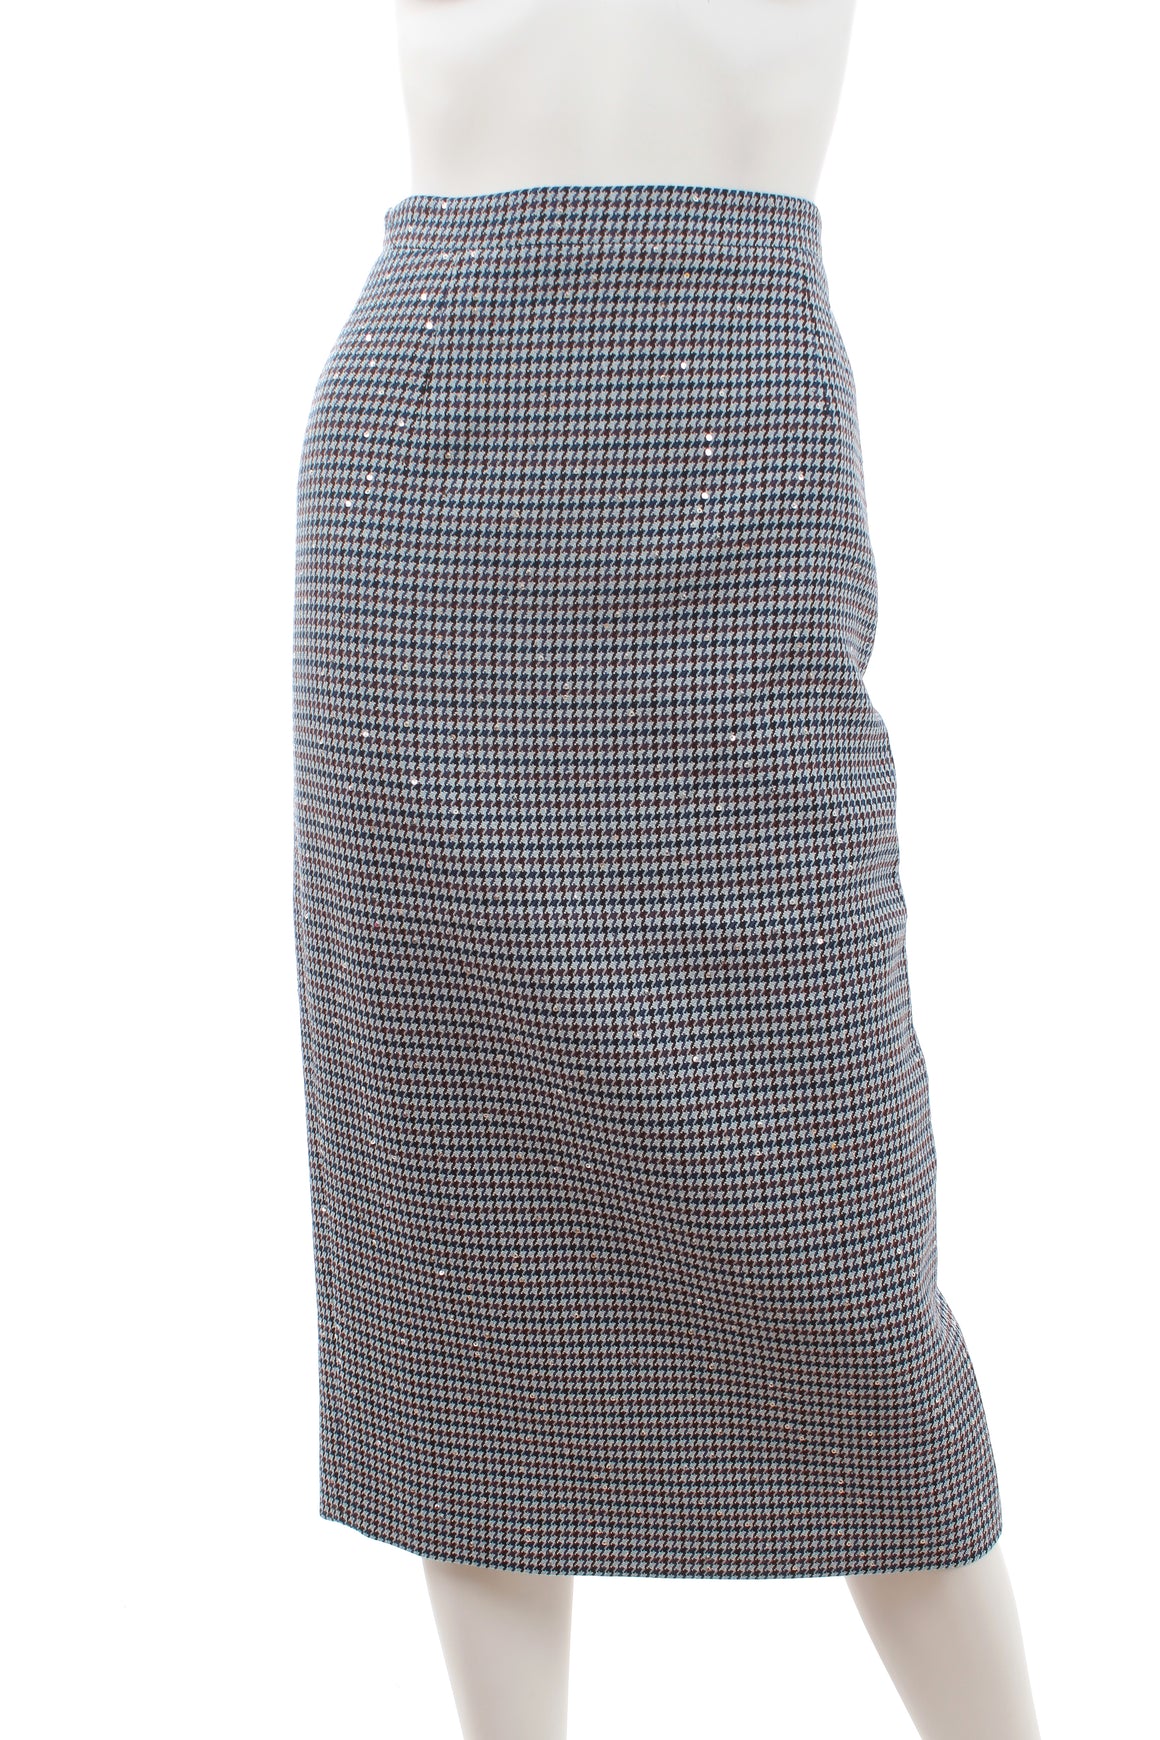 Alessandra Rich Houndstooth Sequin-Embellished Wool-Blend Midi Skirt